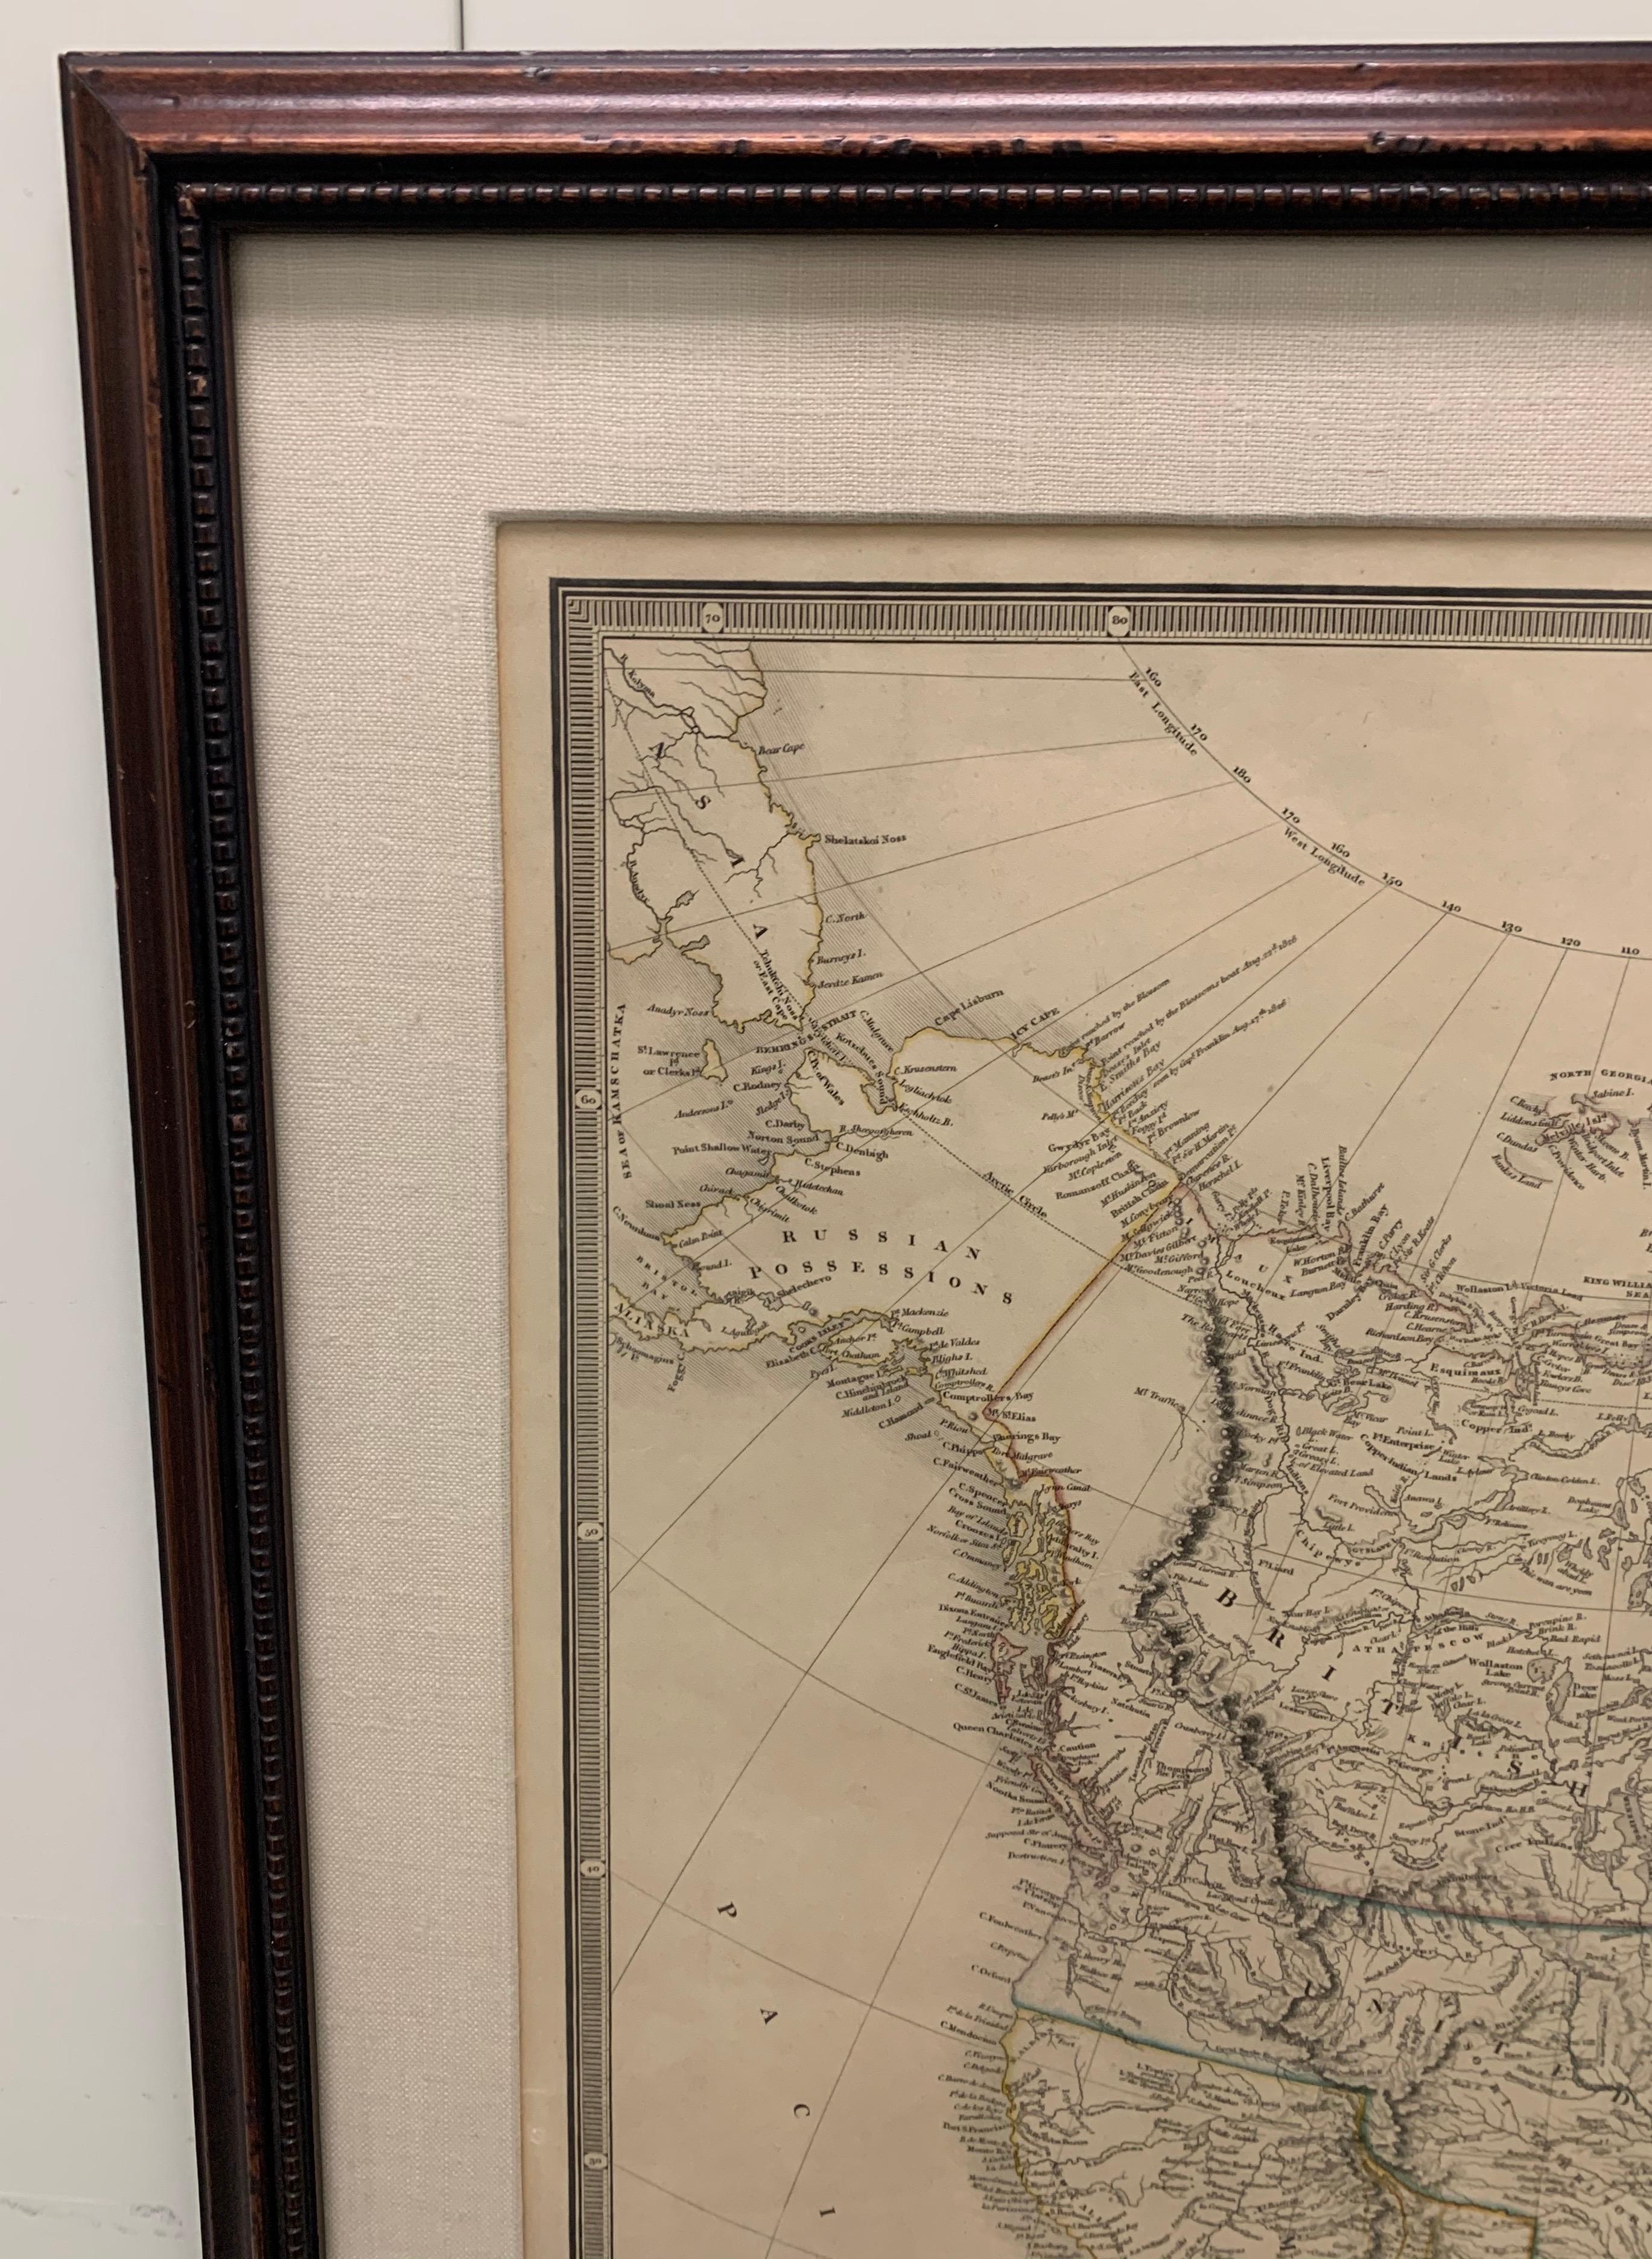 1838 map of North America & recent discoveries. Engraved color map by J. Wyld, London, England. This map shows Texas as a Republic without its panhandle. 
Framed in brown carved wood frame.